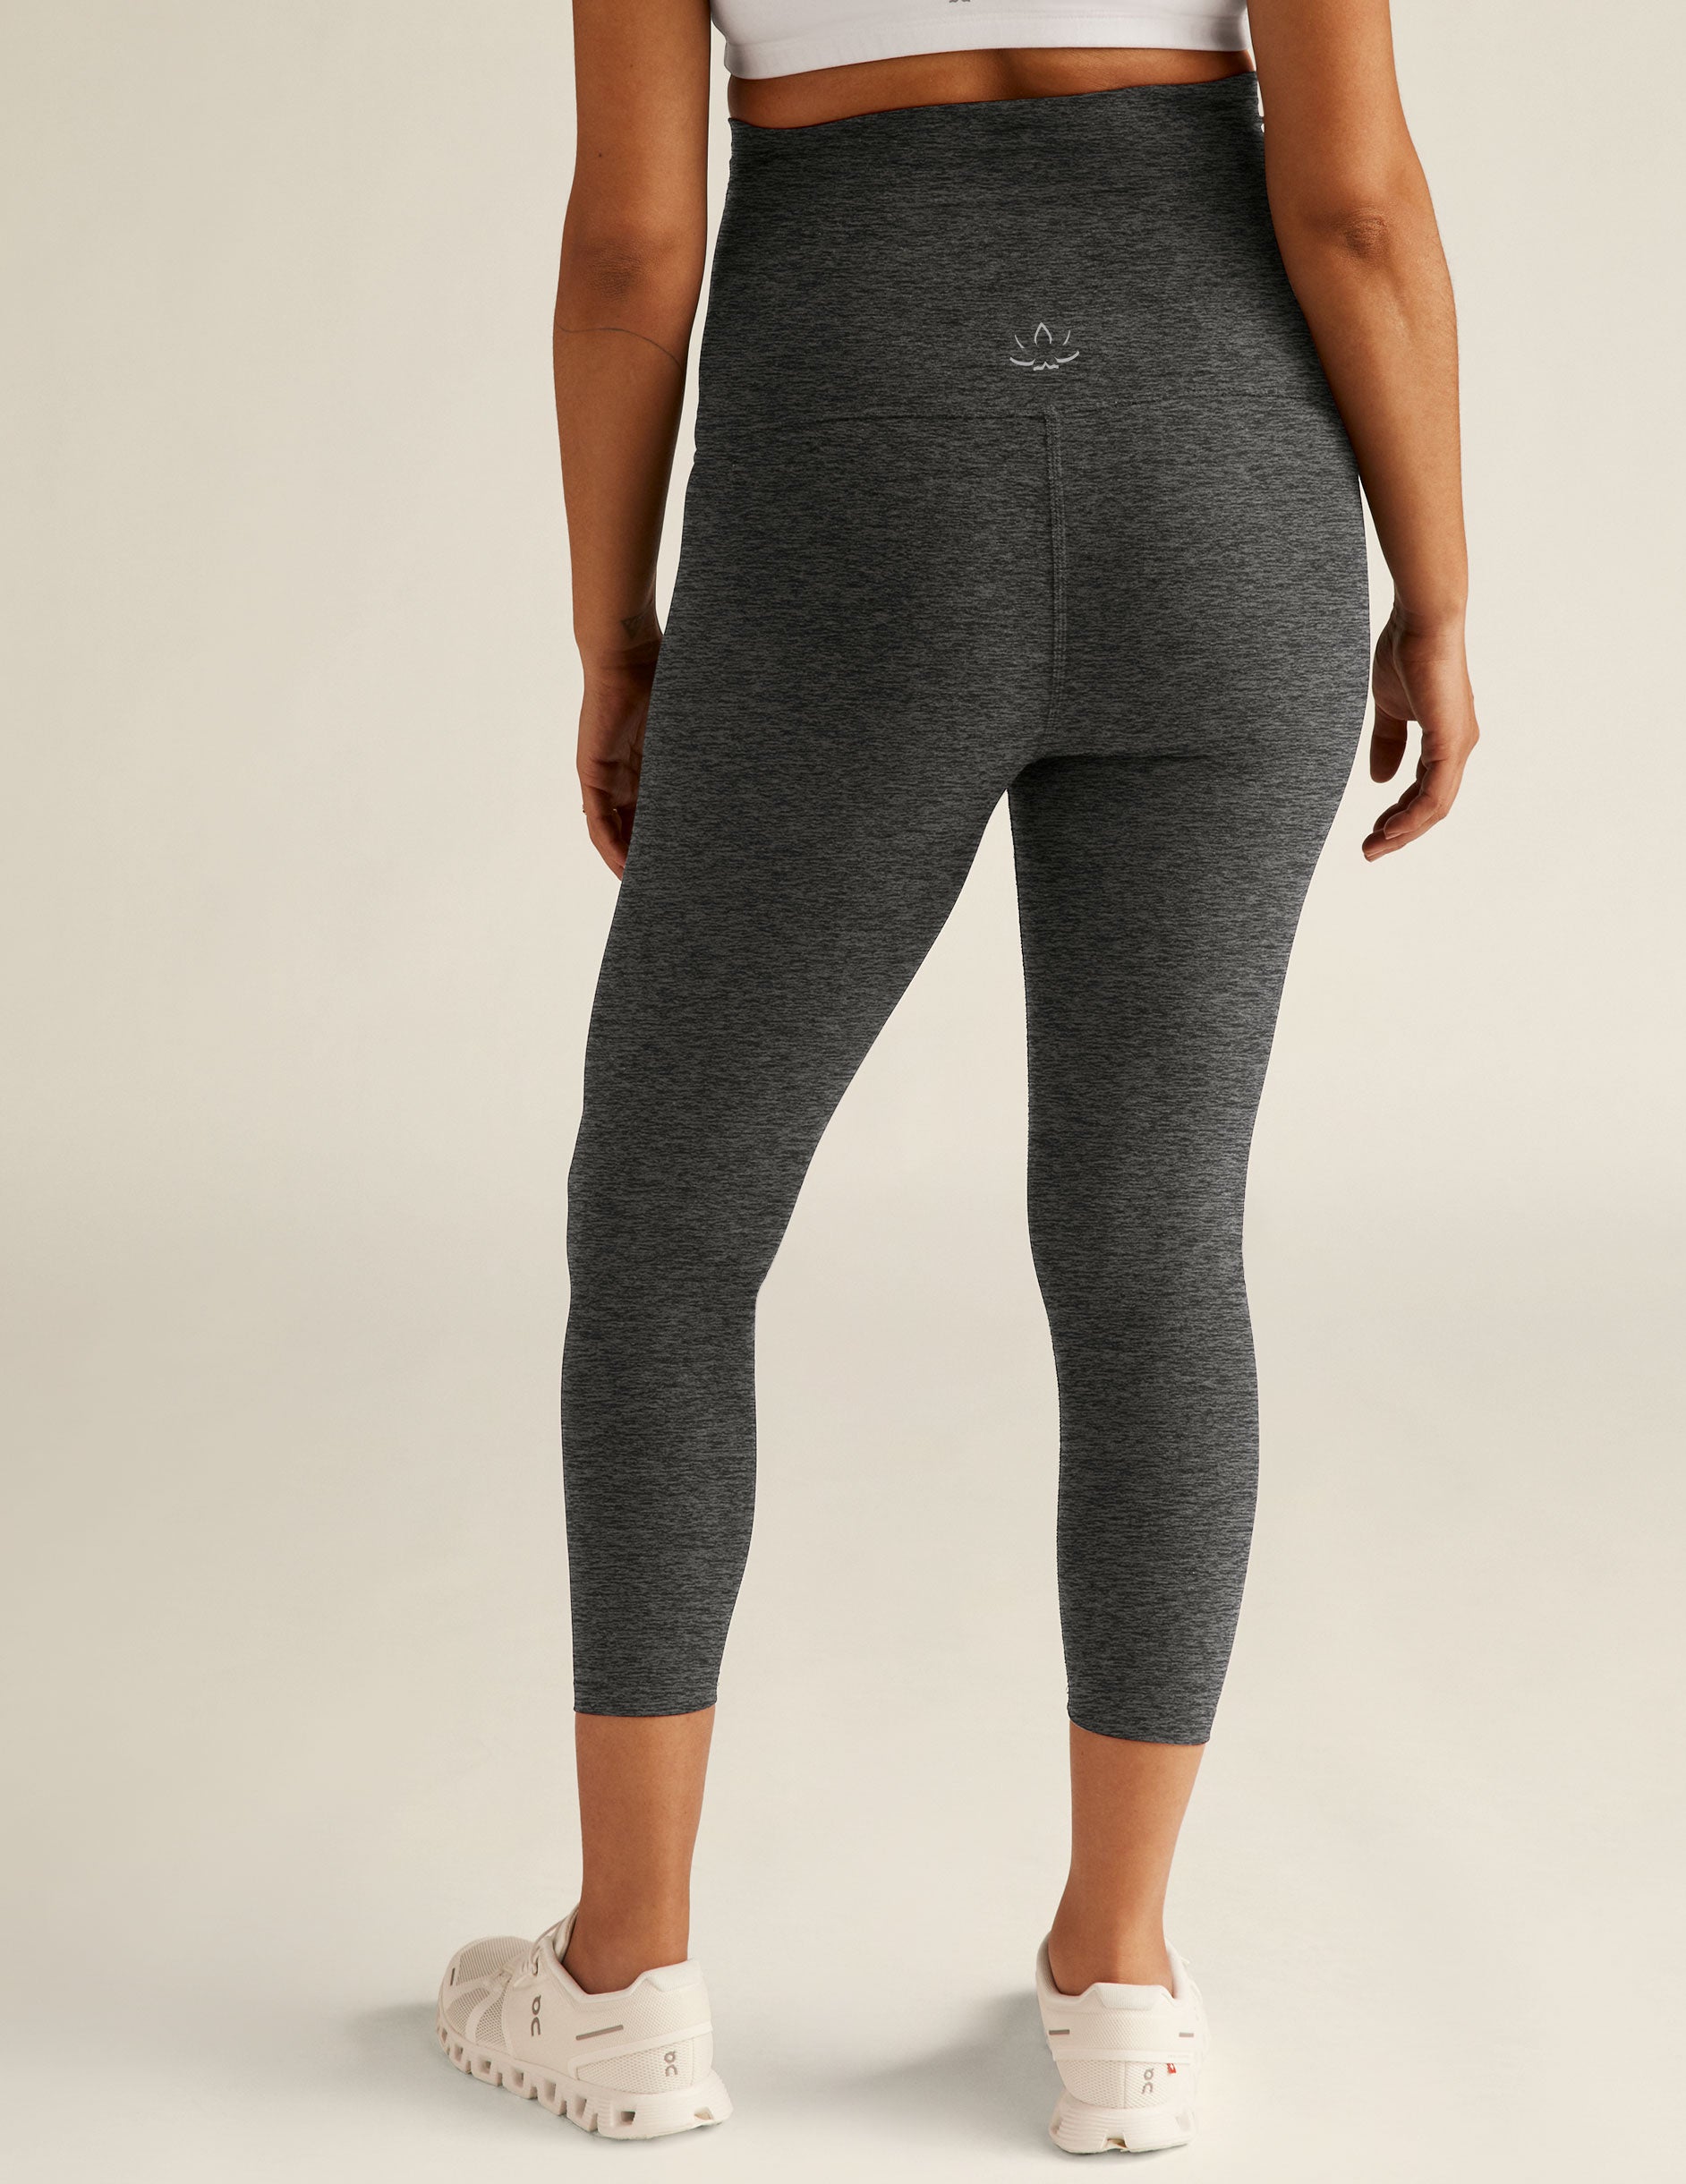 Carriwell Maternity Support and Confort Legging - Clement